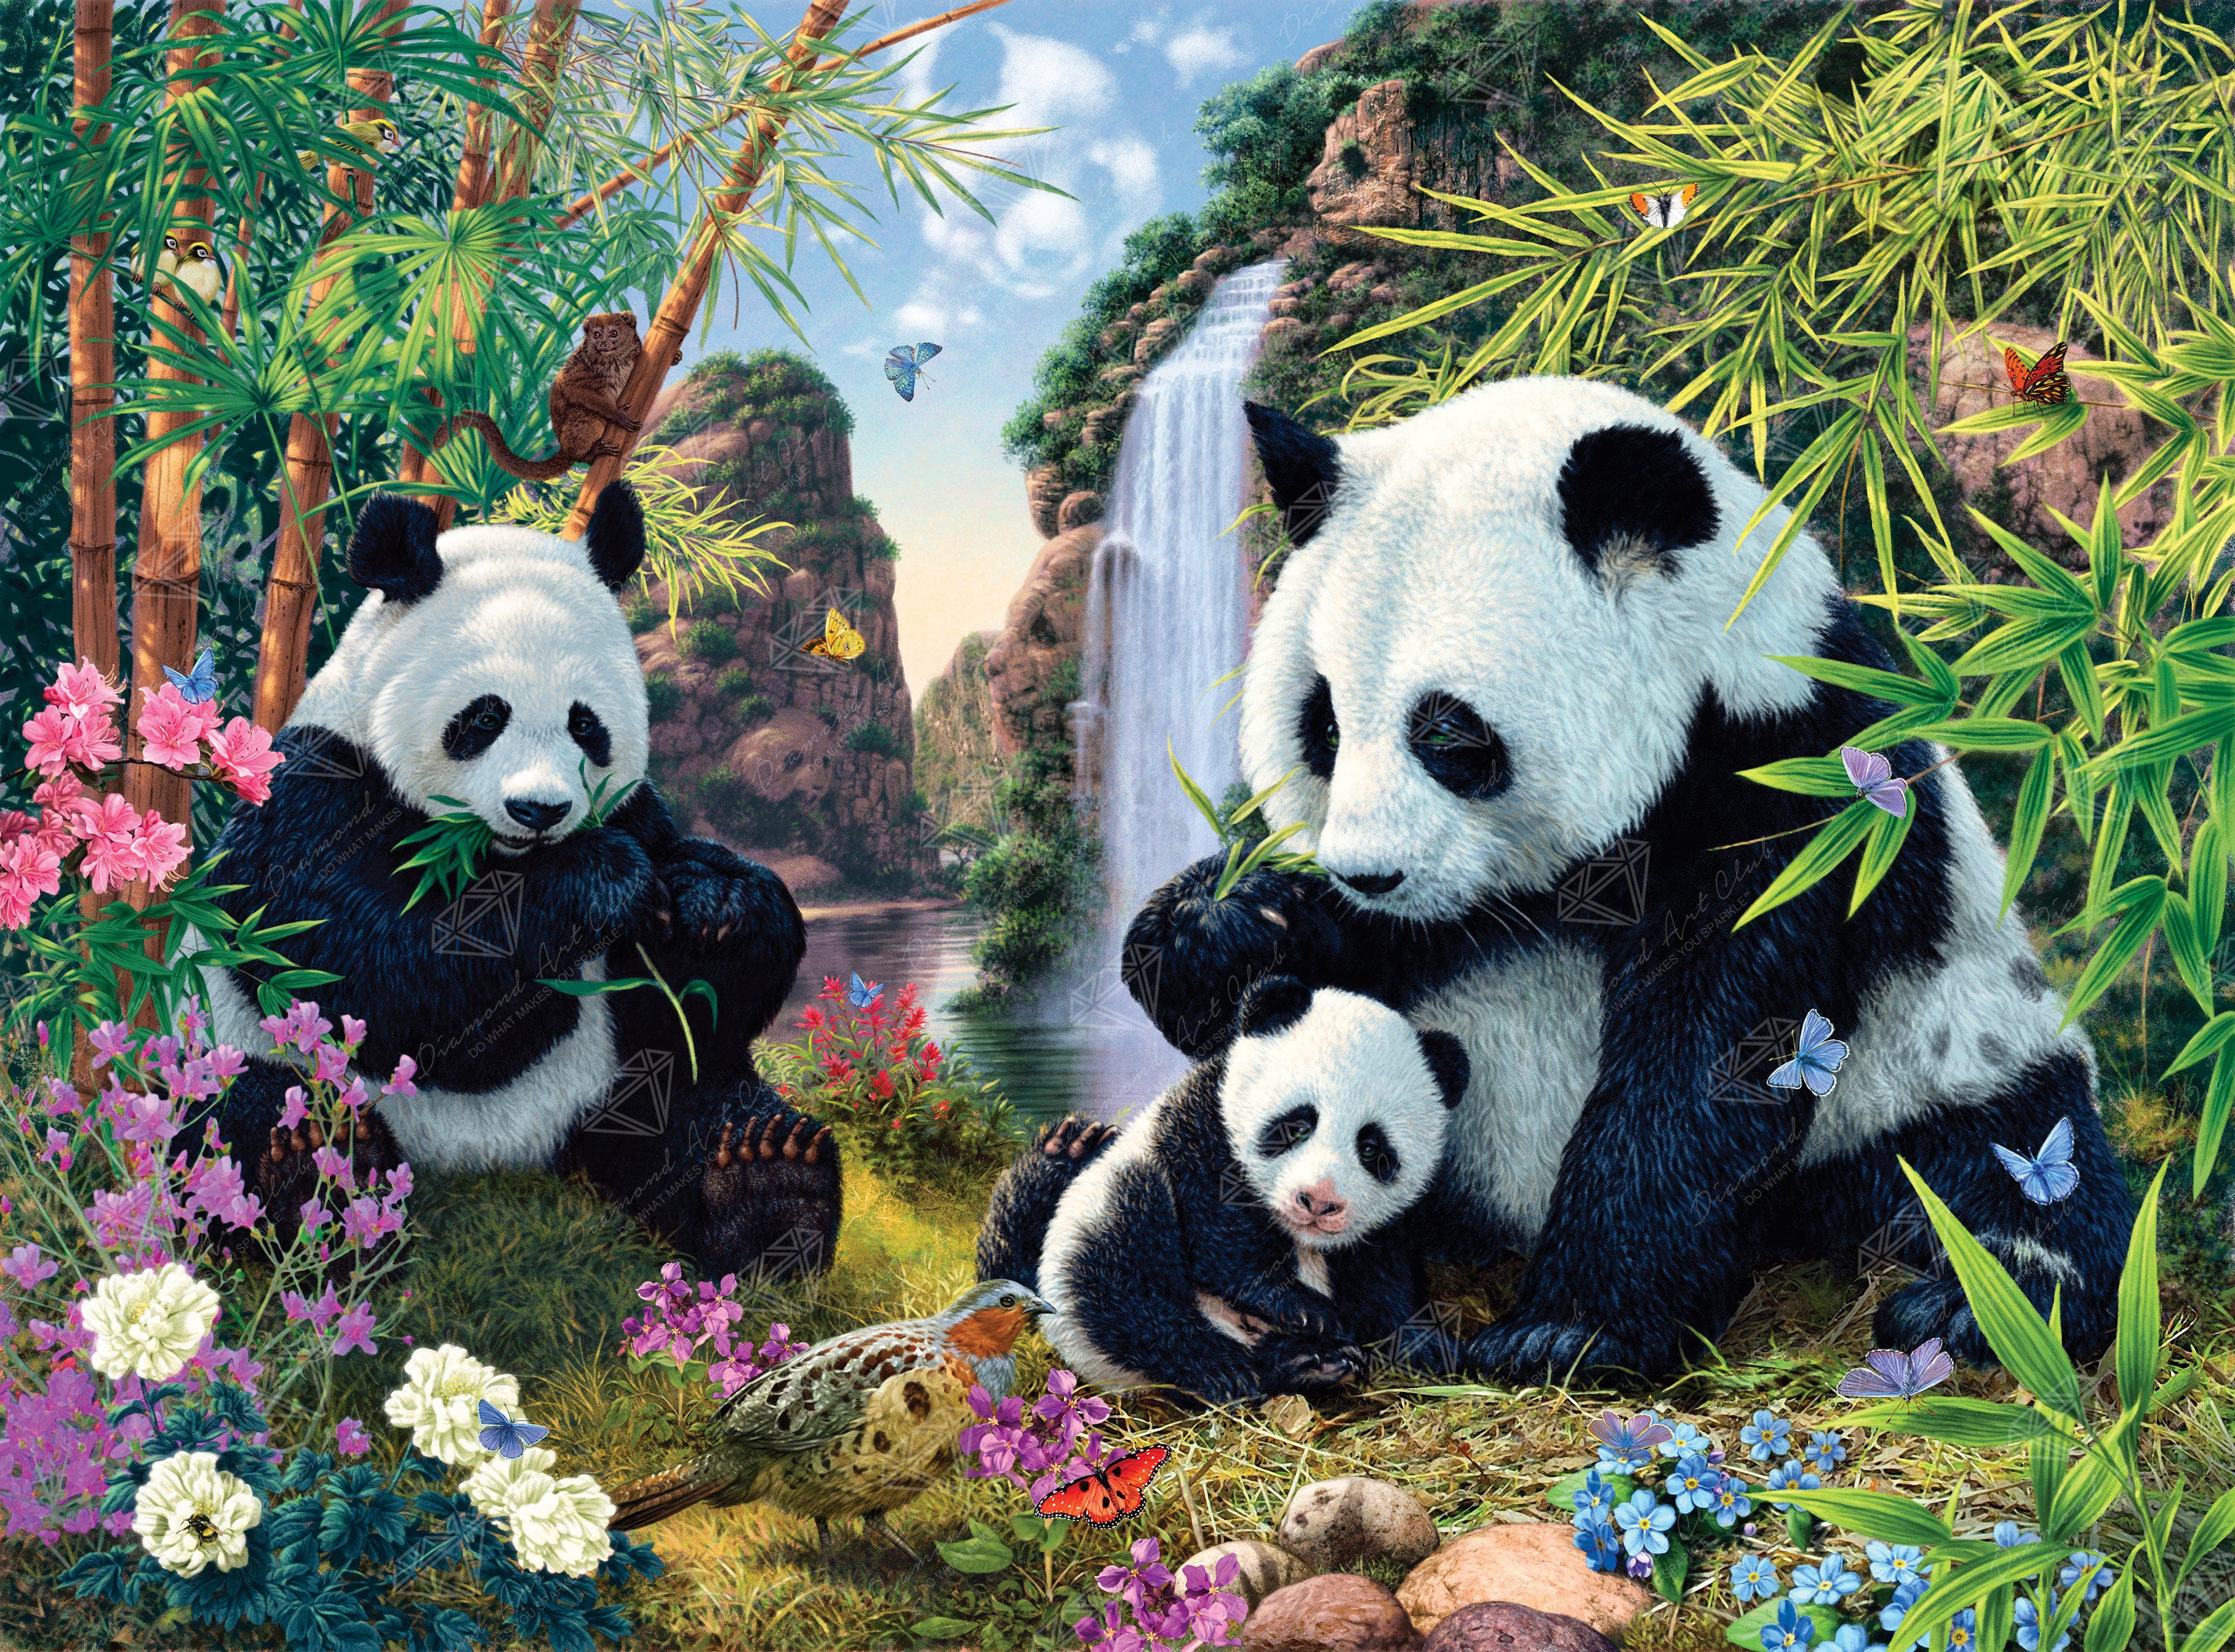 Beauty of Animal Diamond Painting in Canada, by Diamond Painting